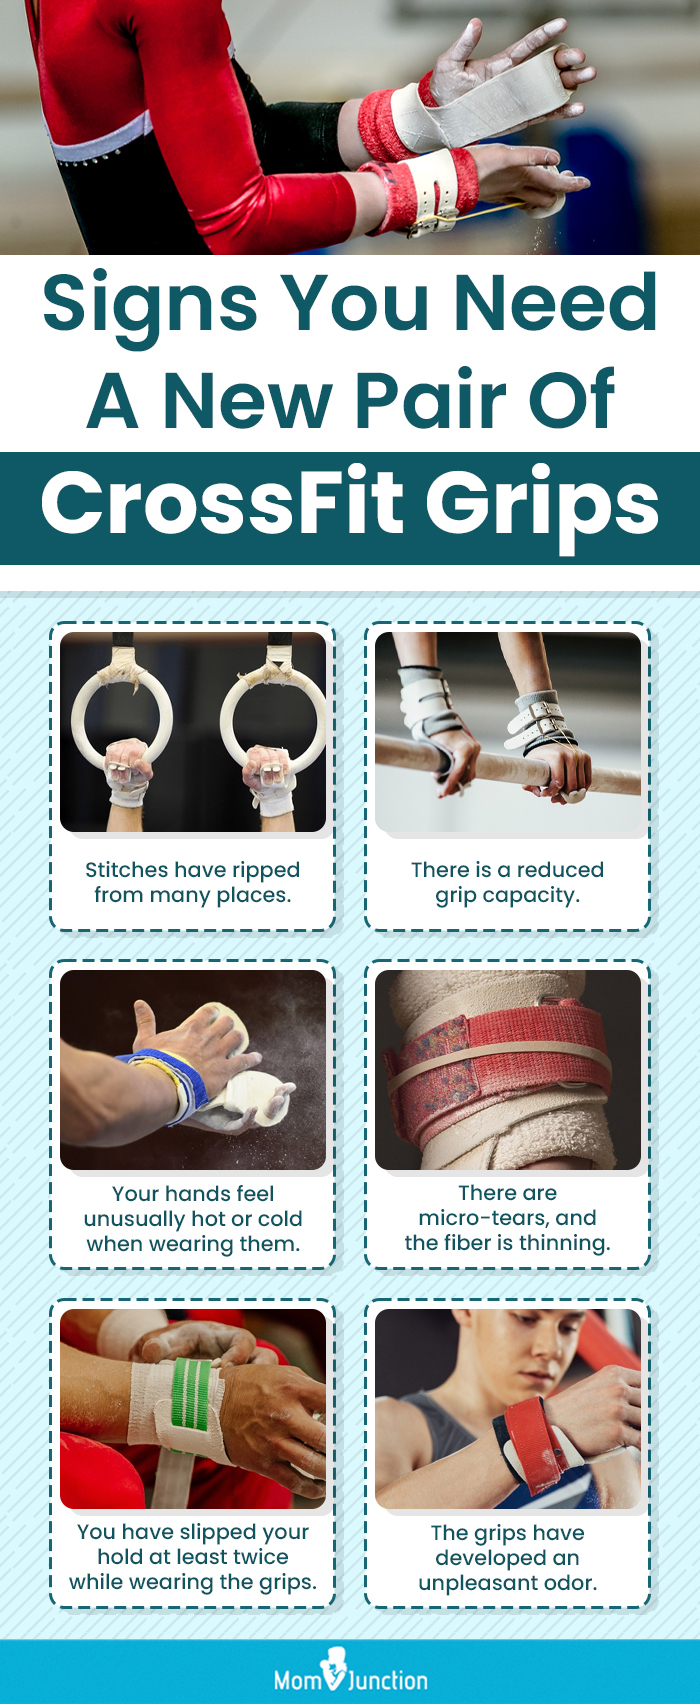 Signs You Need A New Pair Of CrossFit Grips (infographic)